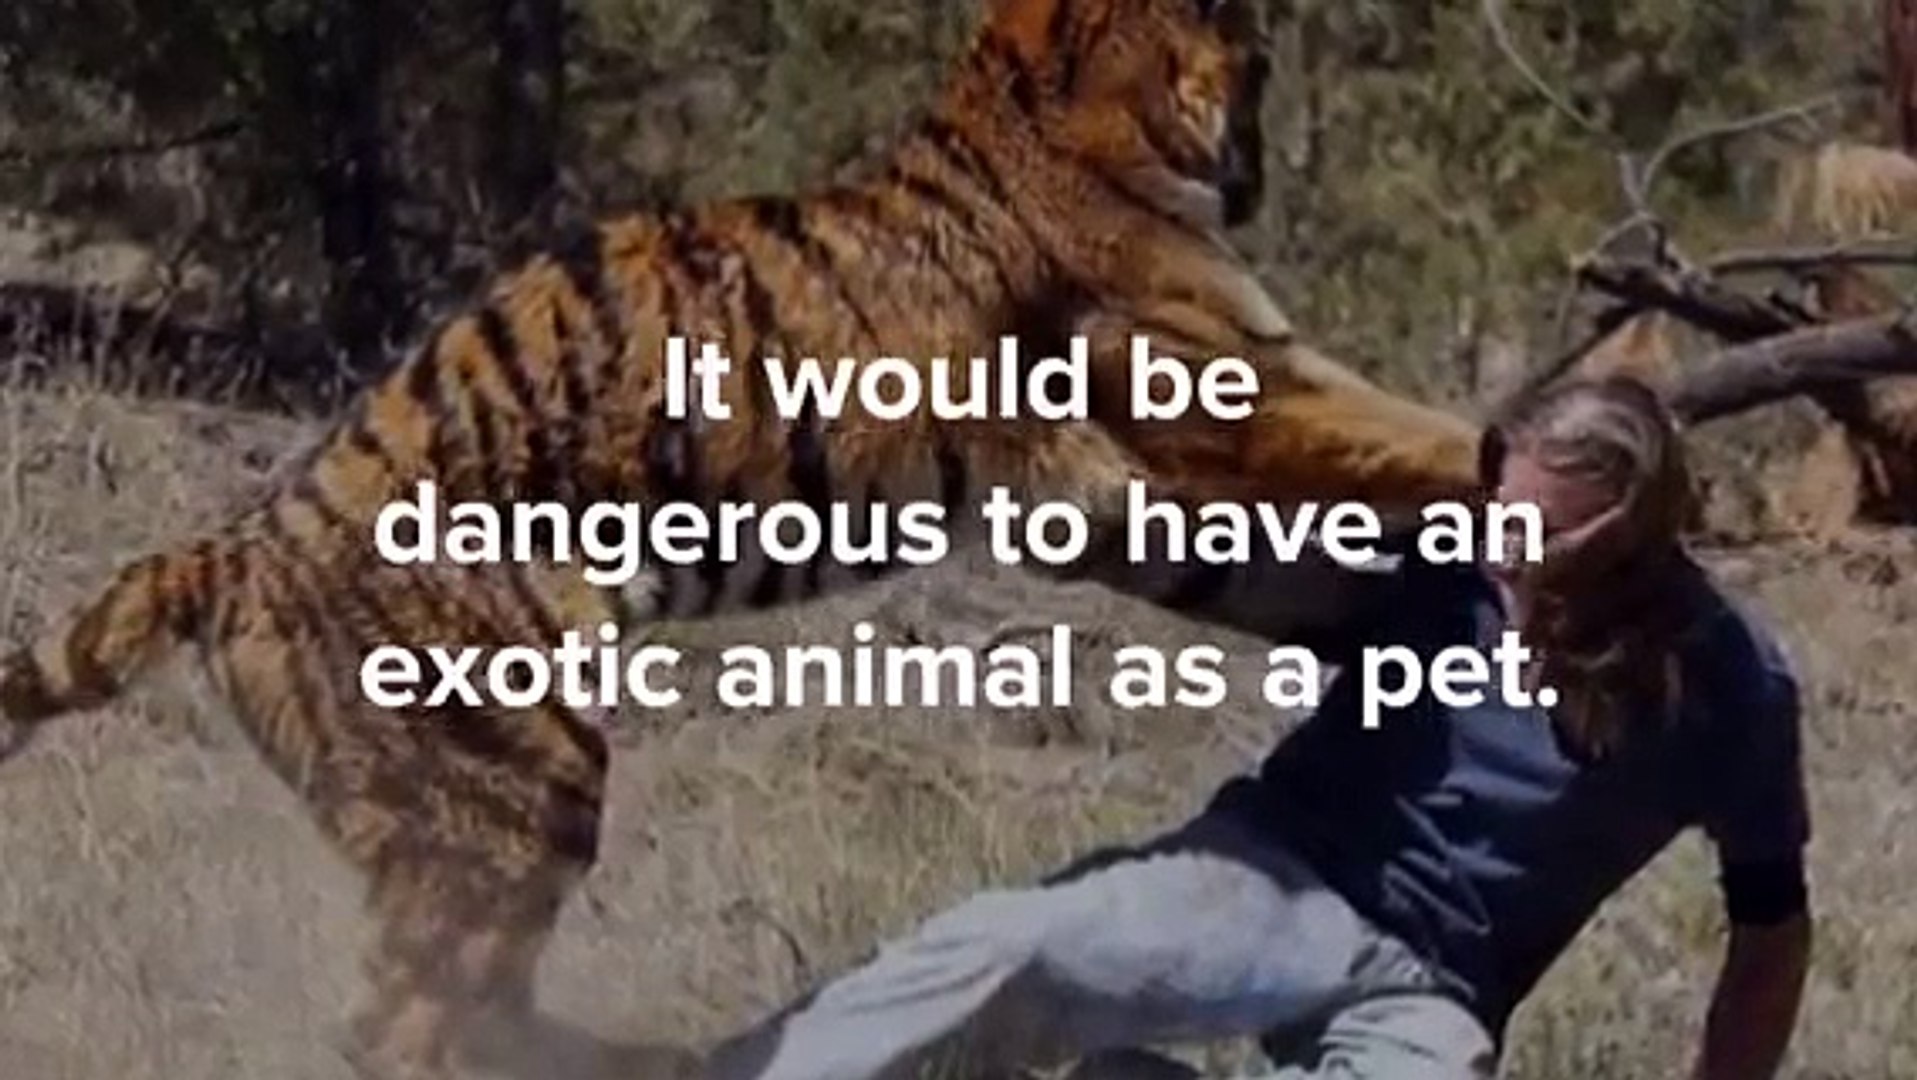 Should Exotic Animals be pets?